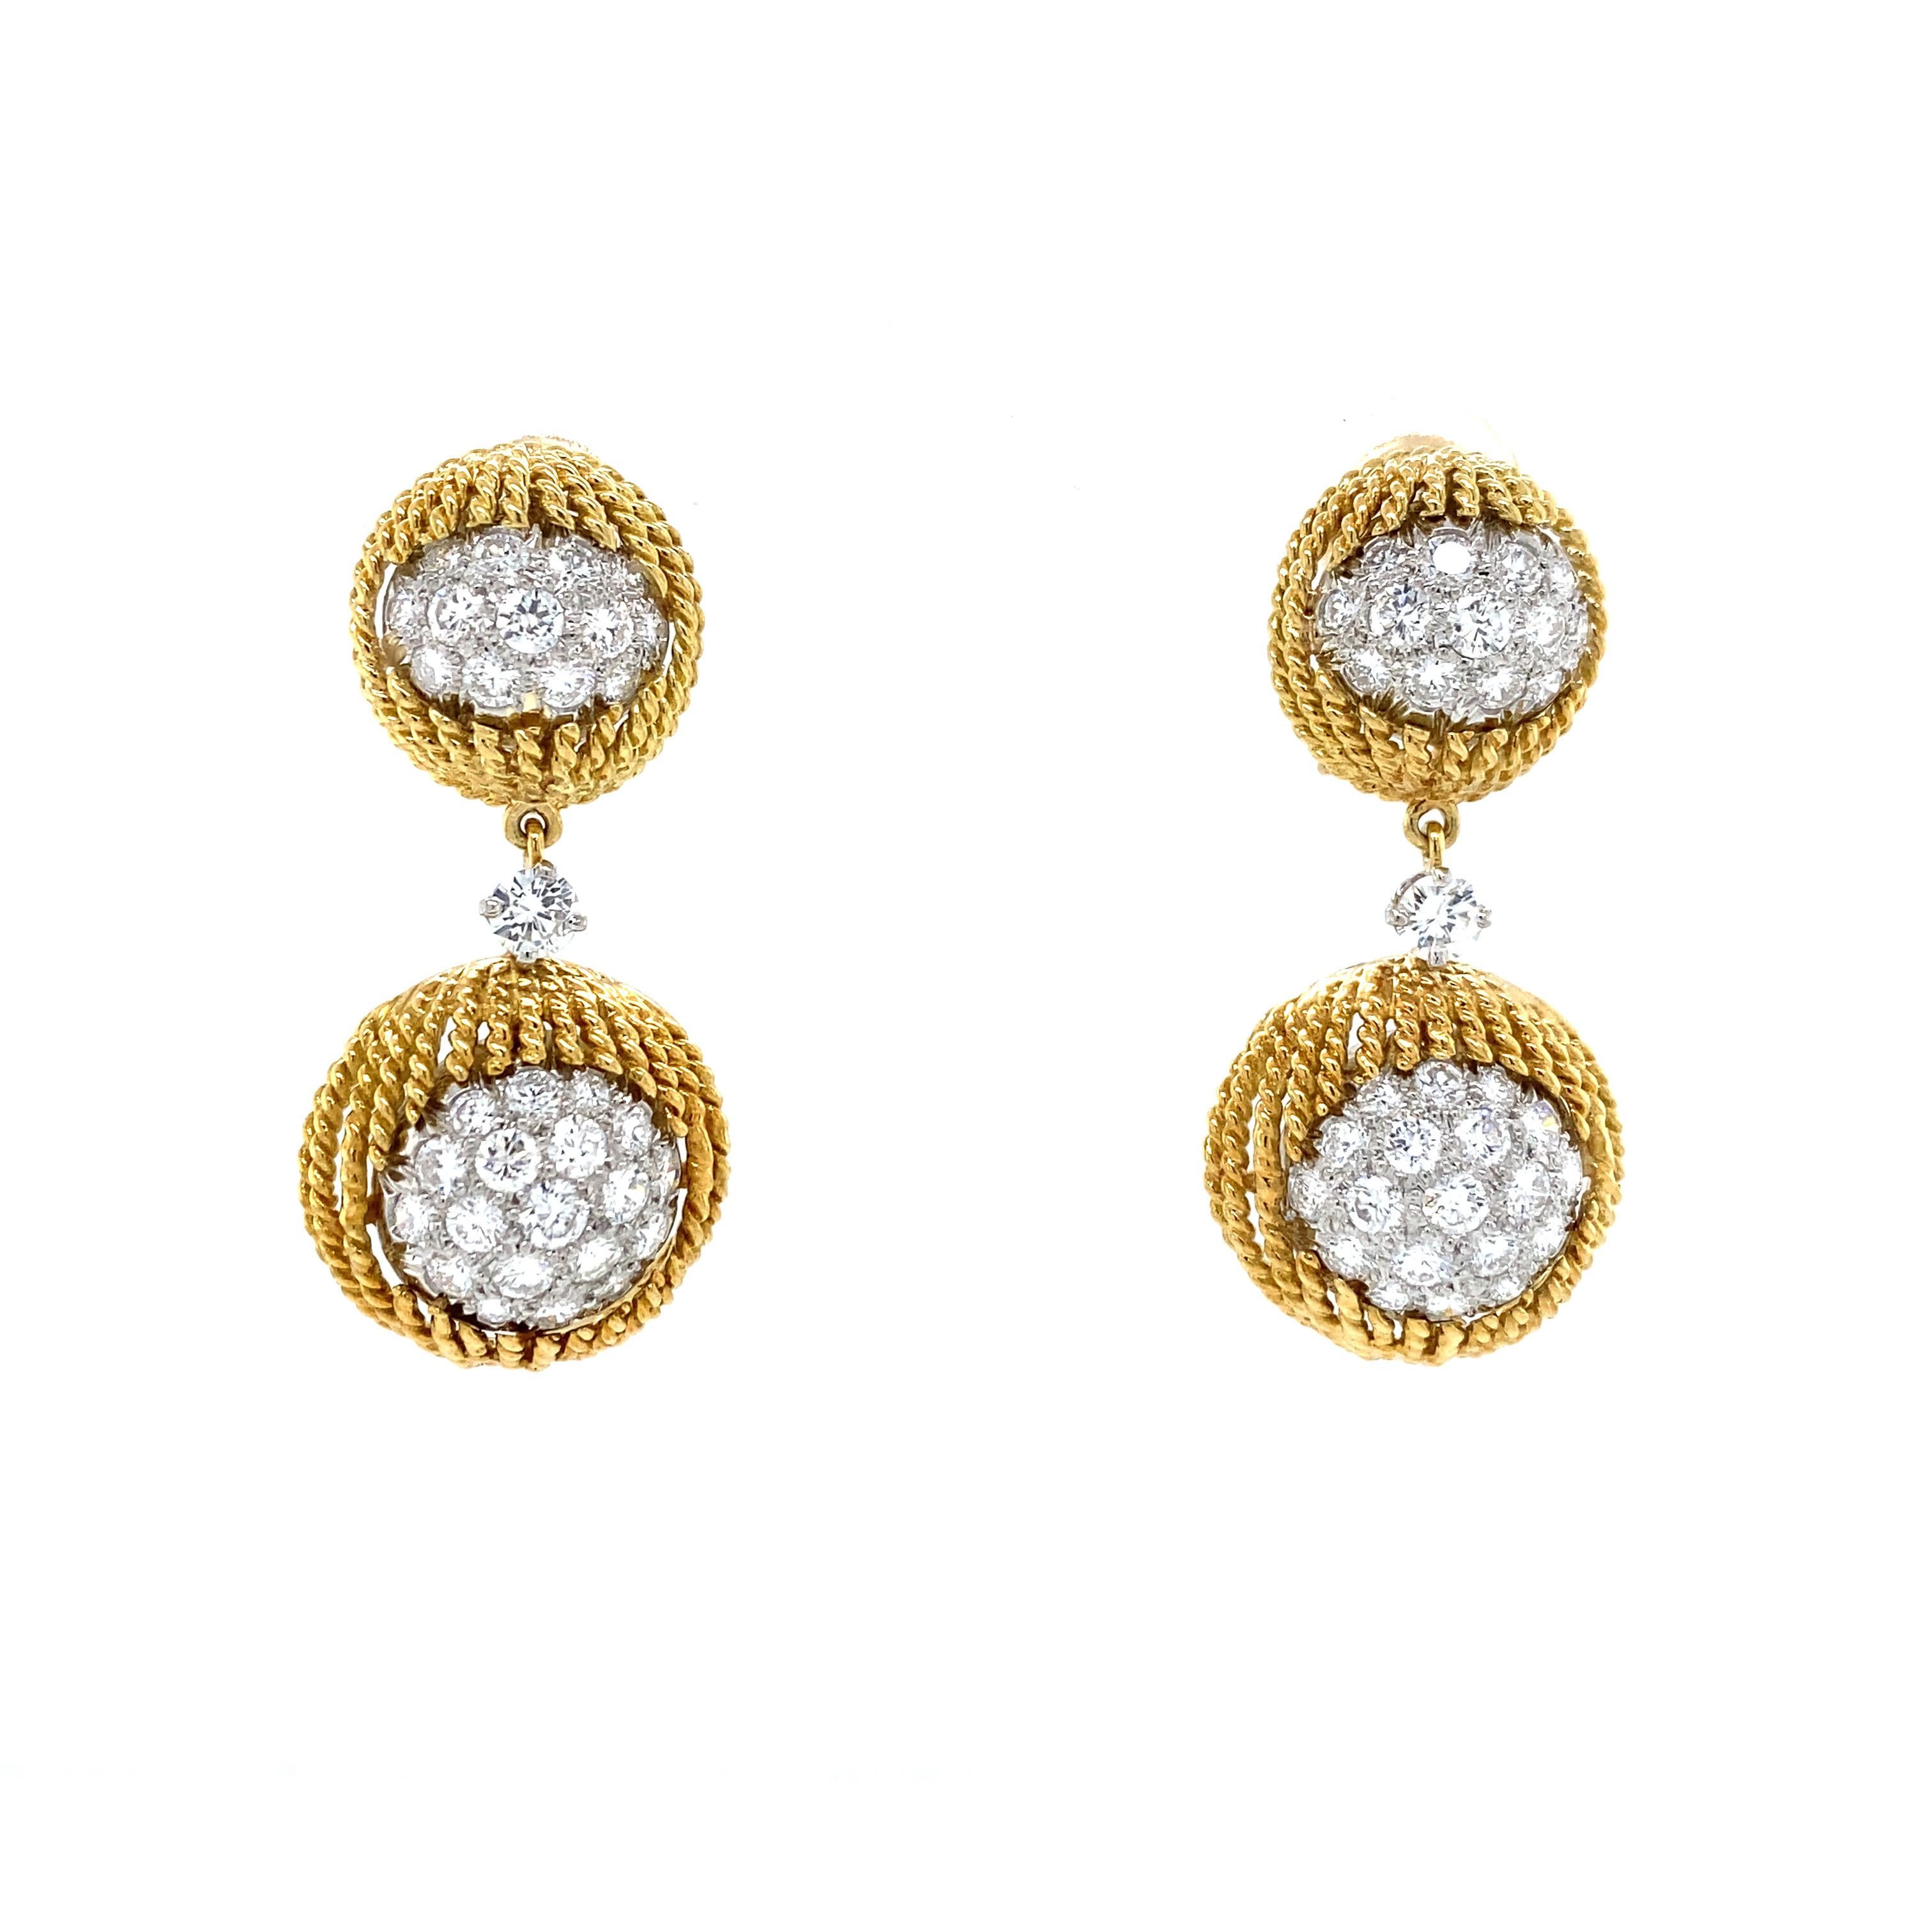 Diamond Cluster Rope Drop Earring in Platinum and 18K Yellow Gold.  Round Brilliant Cut Diamonds weighing 4.18 carat total weight, G-H in color and VS in clarity are expertly set.  The Earrings measure 1 1/2 inch in length and 3/4 inch in width are